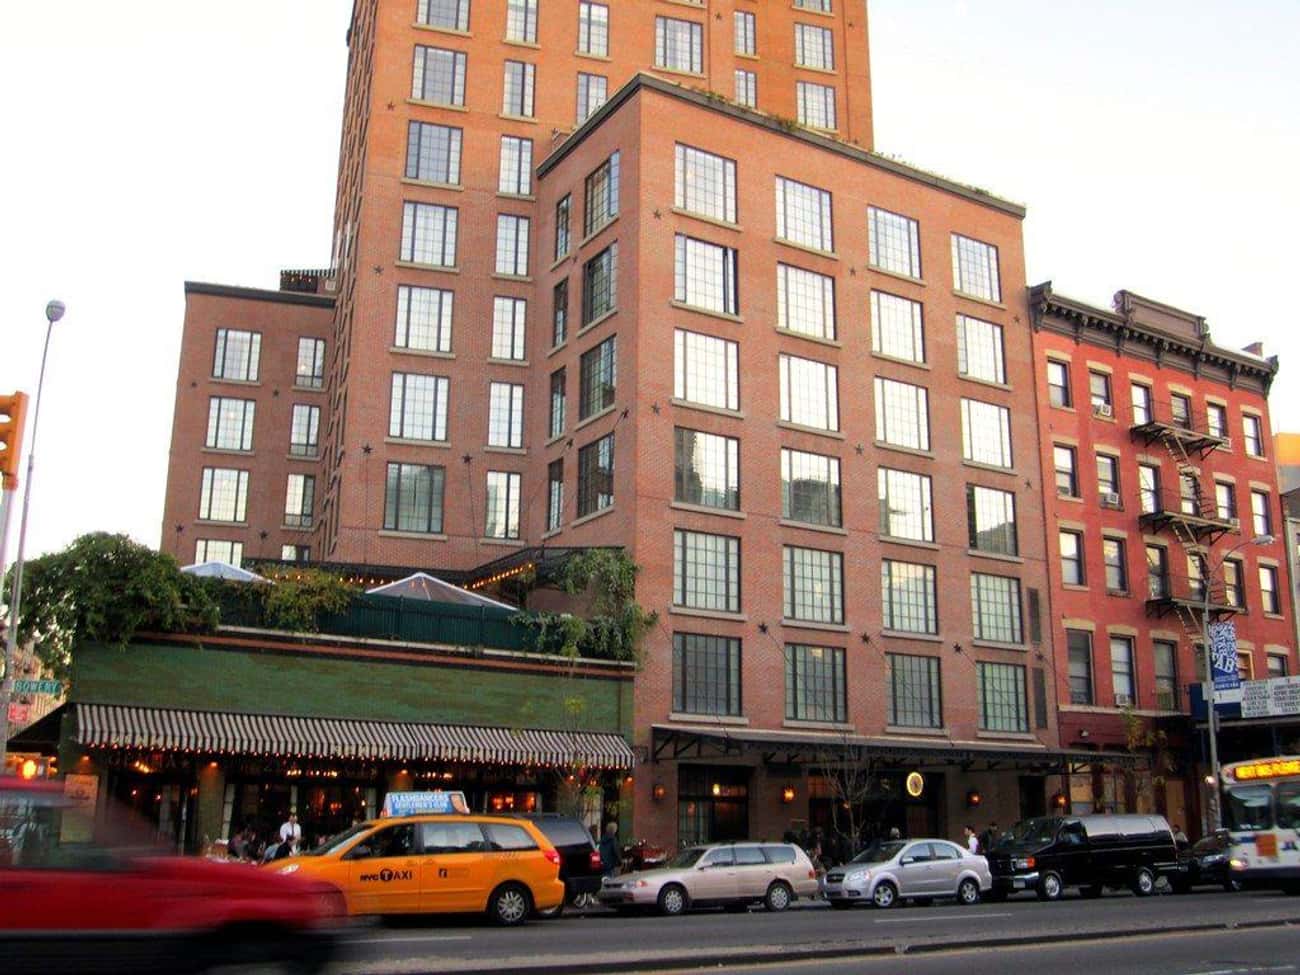 The Bowery Hotel May Be The Most Haunted Hotel In NYC